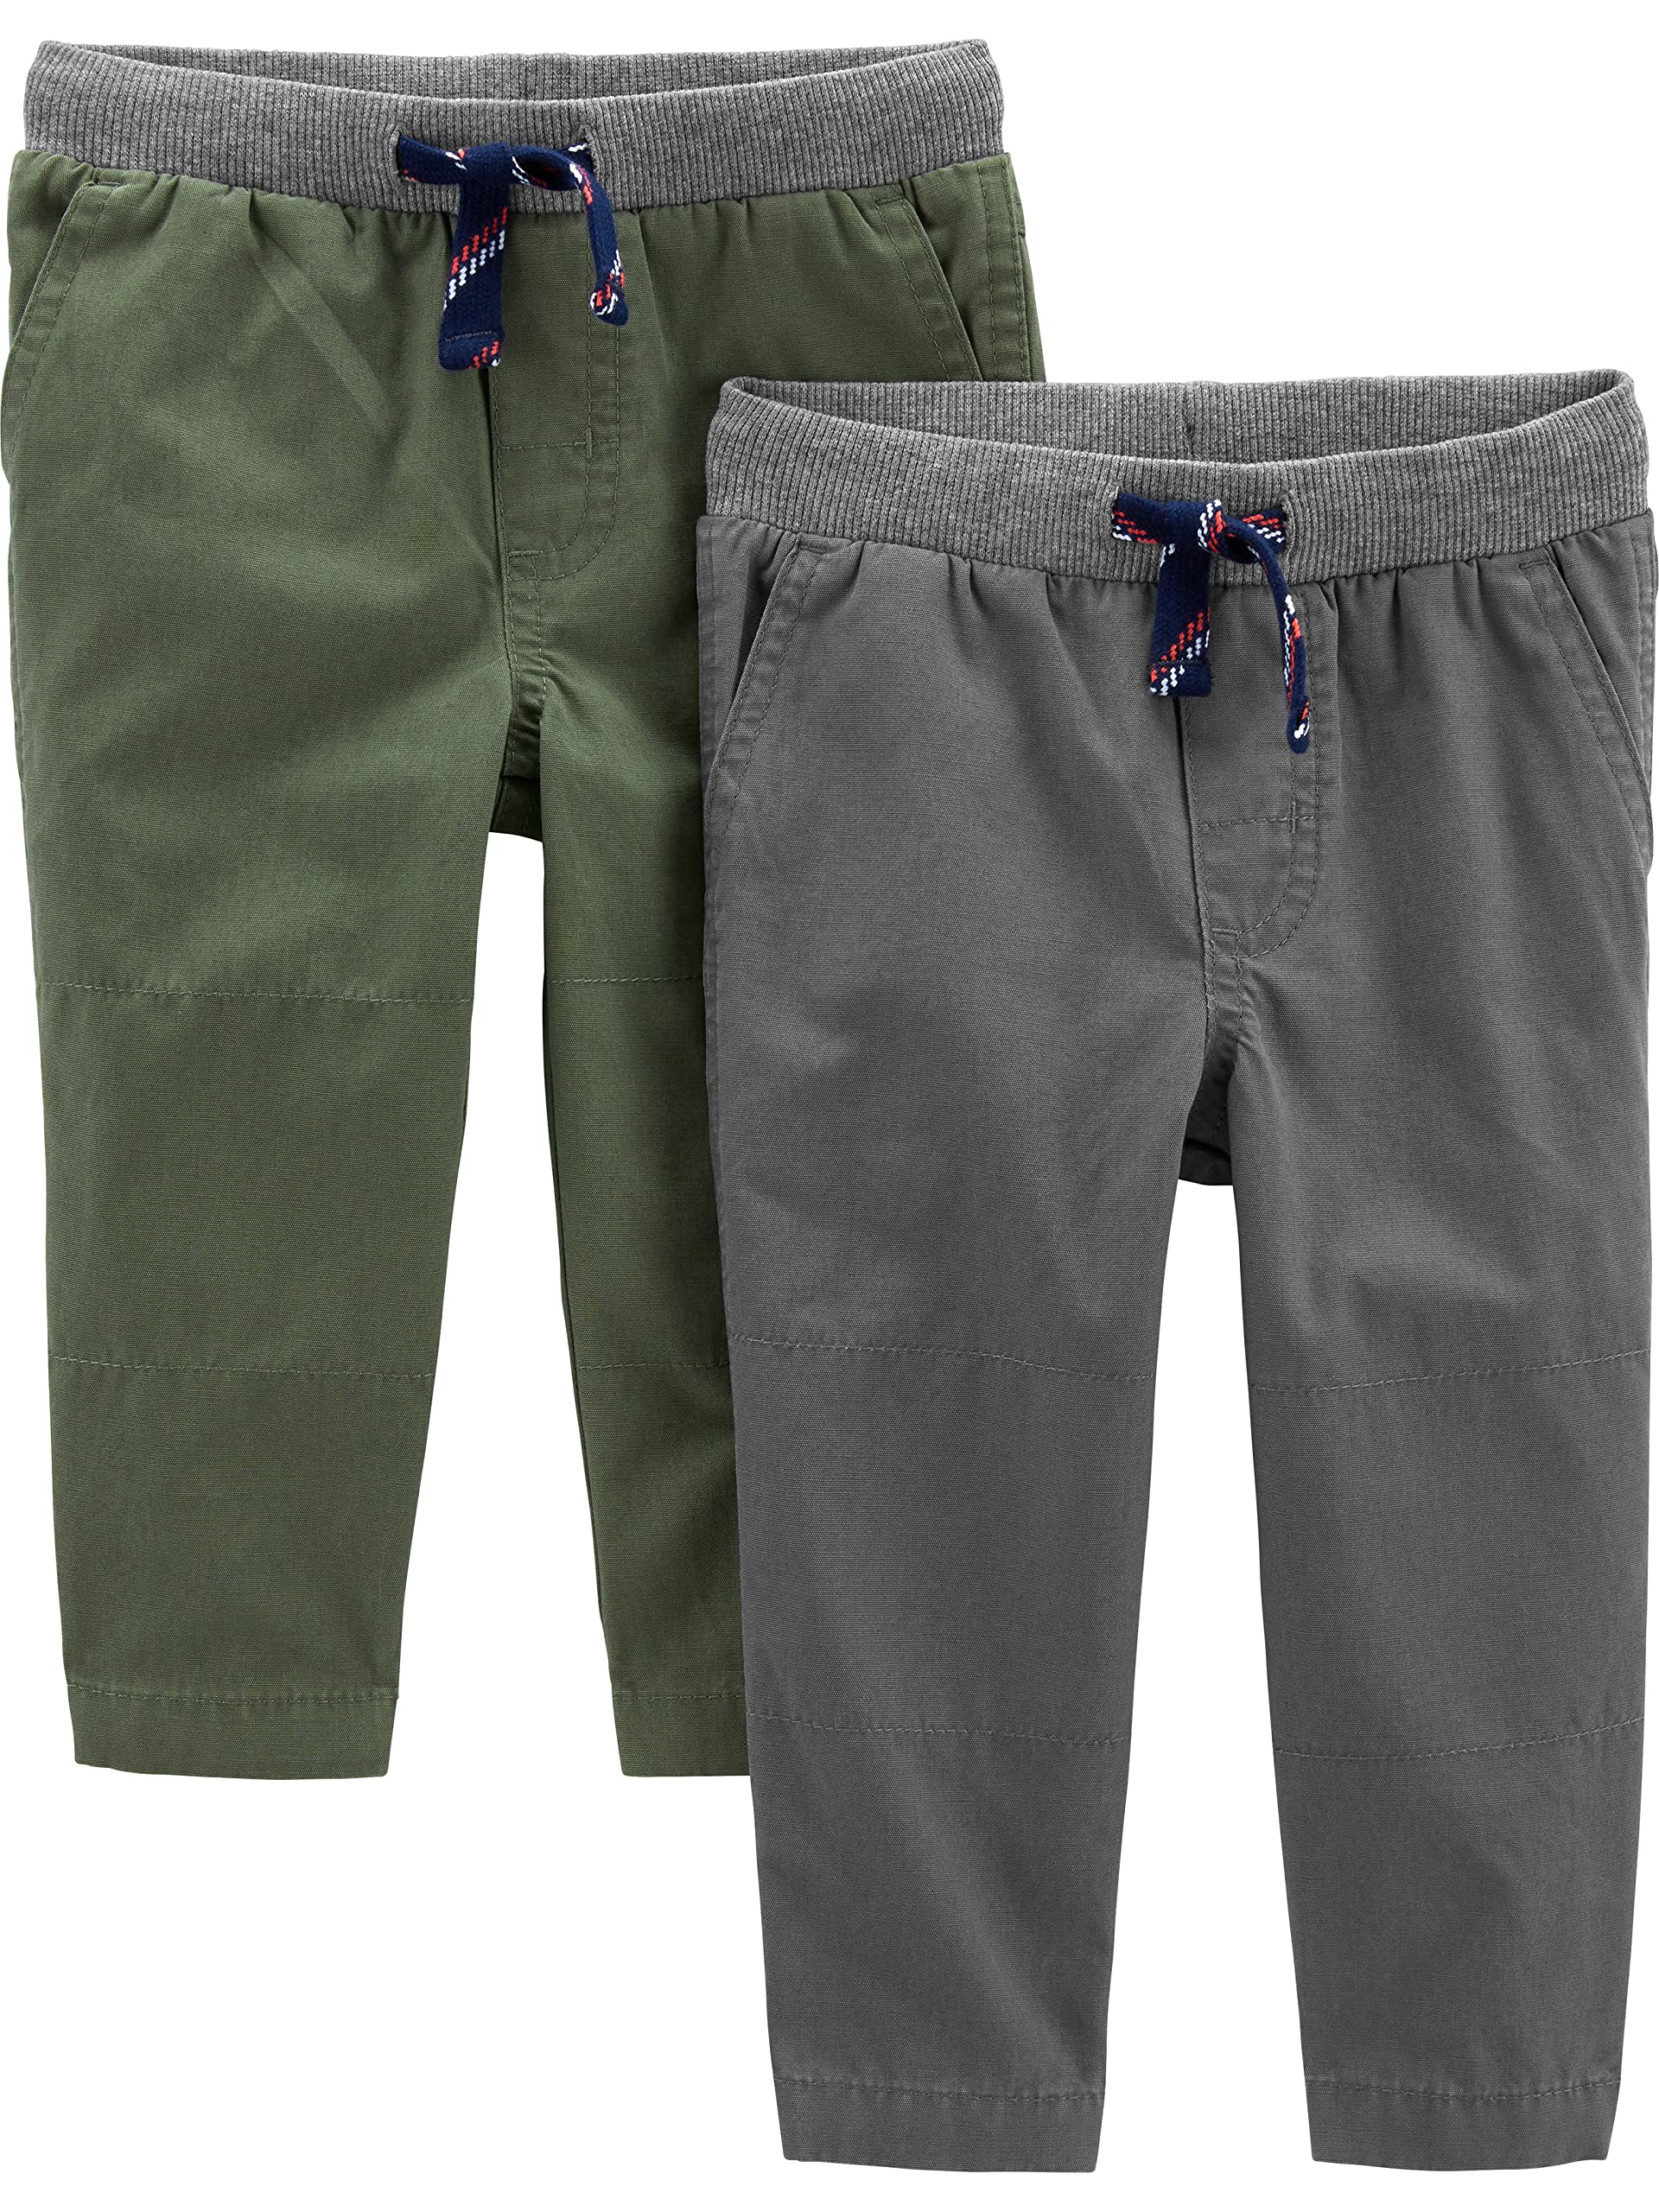 Simple Joys by Carter's Boys and Toddlers' Pull-On Pant, Pack of 2